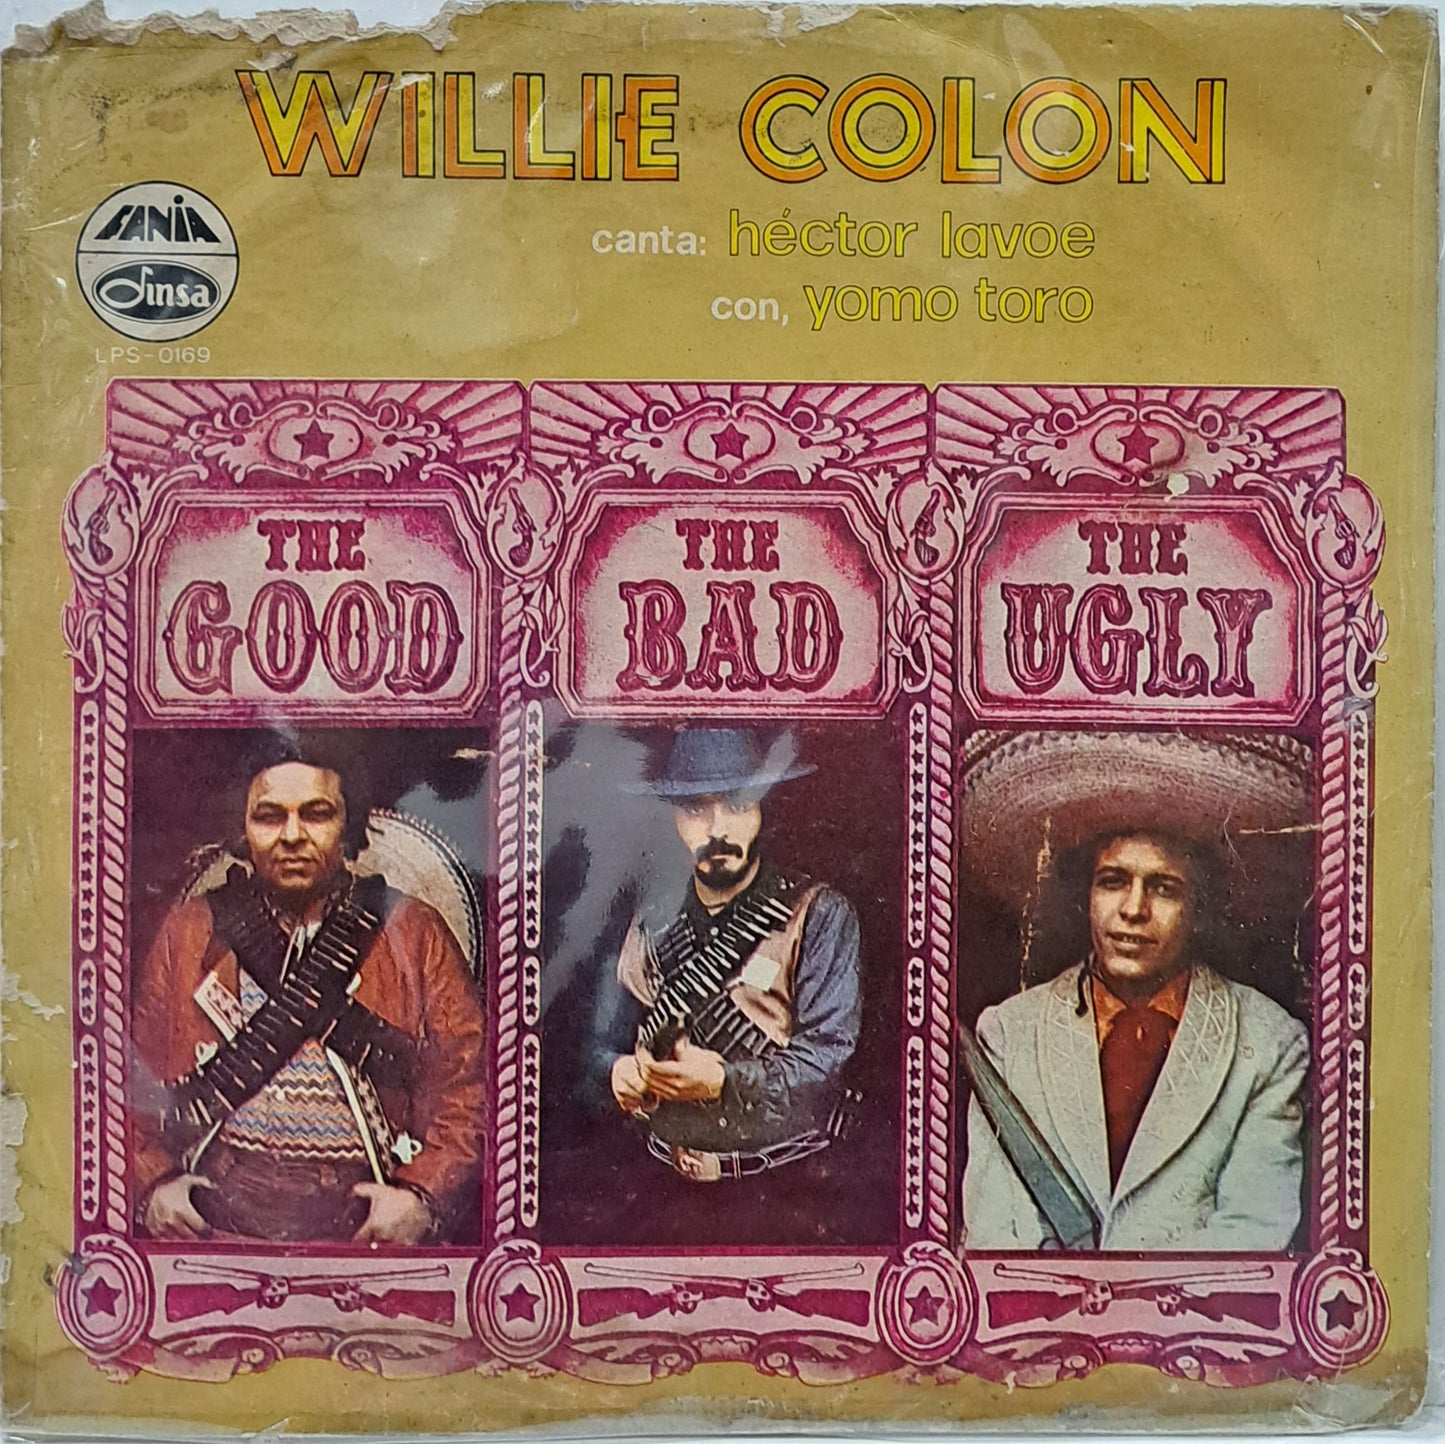 WILLIE COLON - THE GOOD THE BAD THE UGLY LP